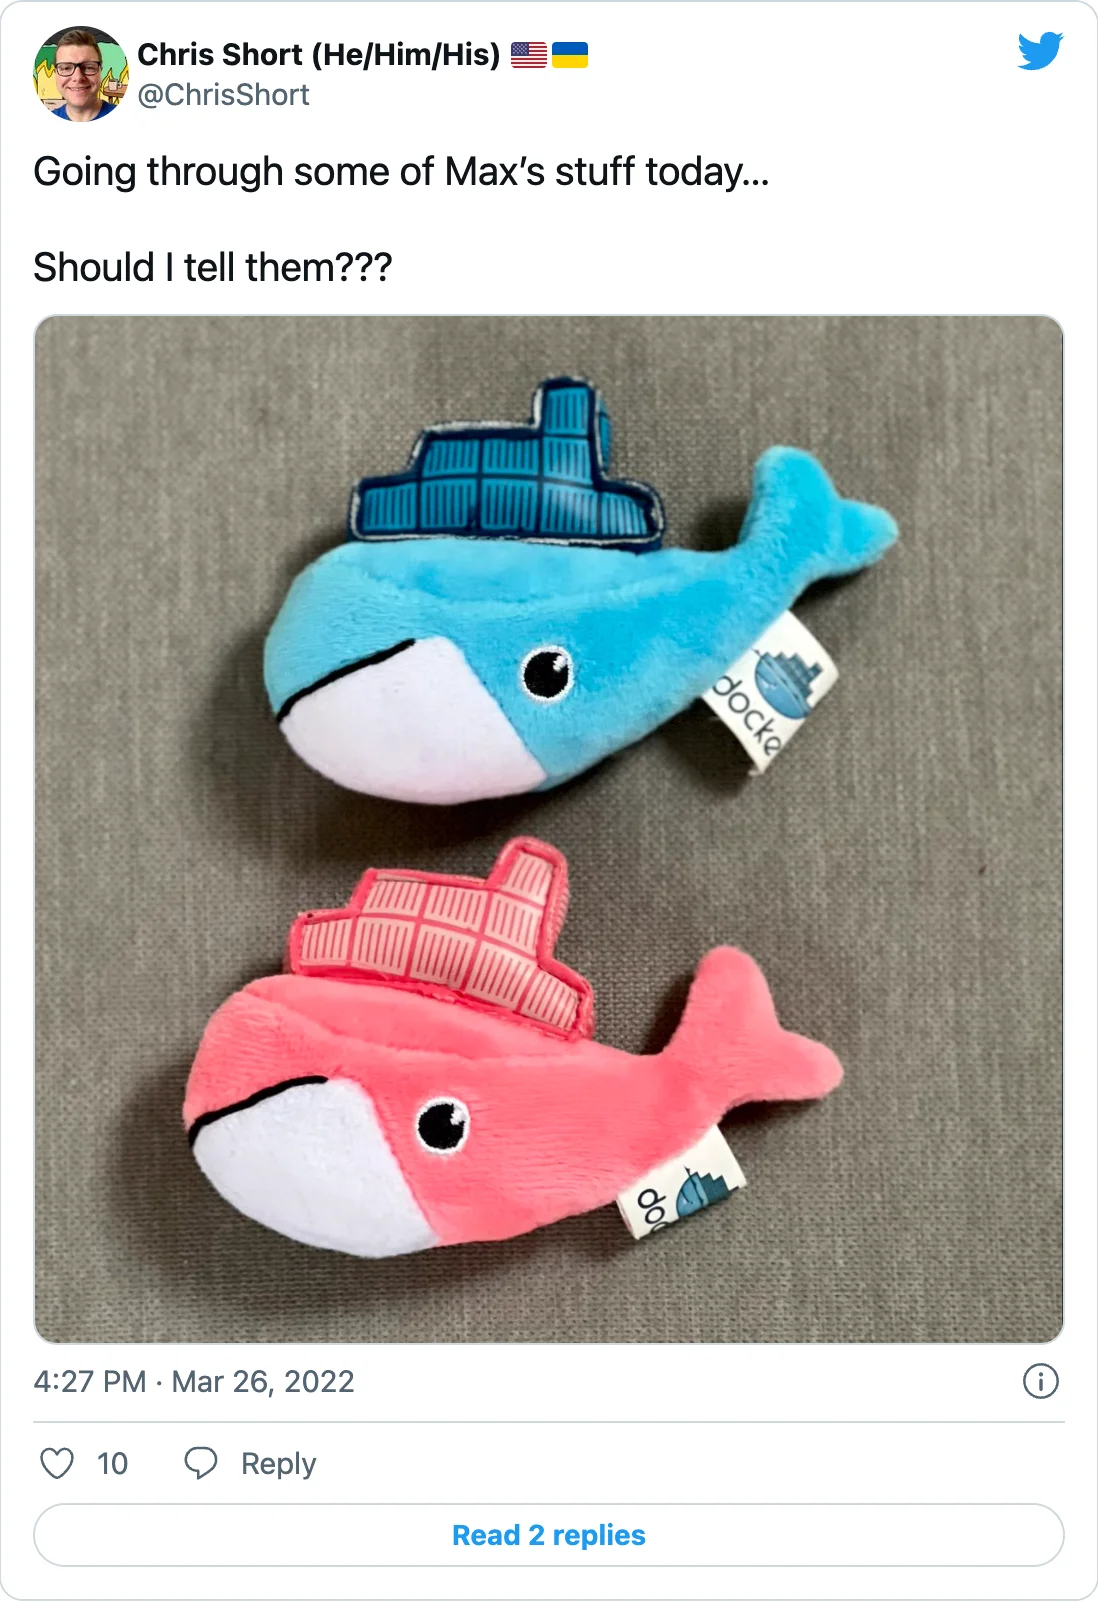 ChrisShort (@ChrisShort on Twitter) &ldquo;Going through some of Max’s stuff today&hellip; (picture of Docker whale stuffed toys) Should I tell them???&rdquo;